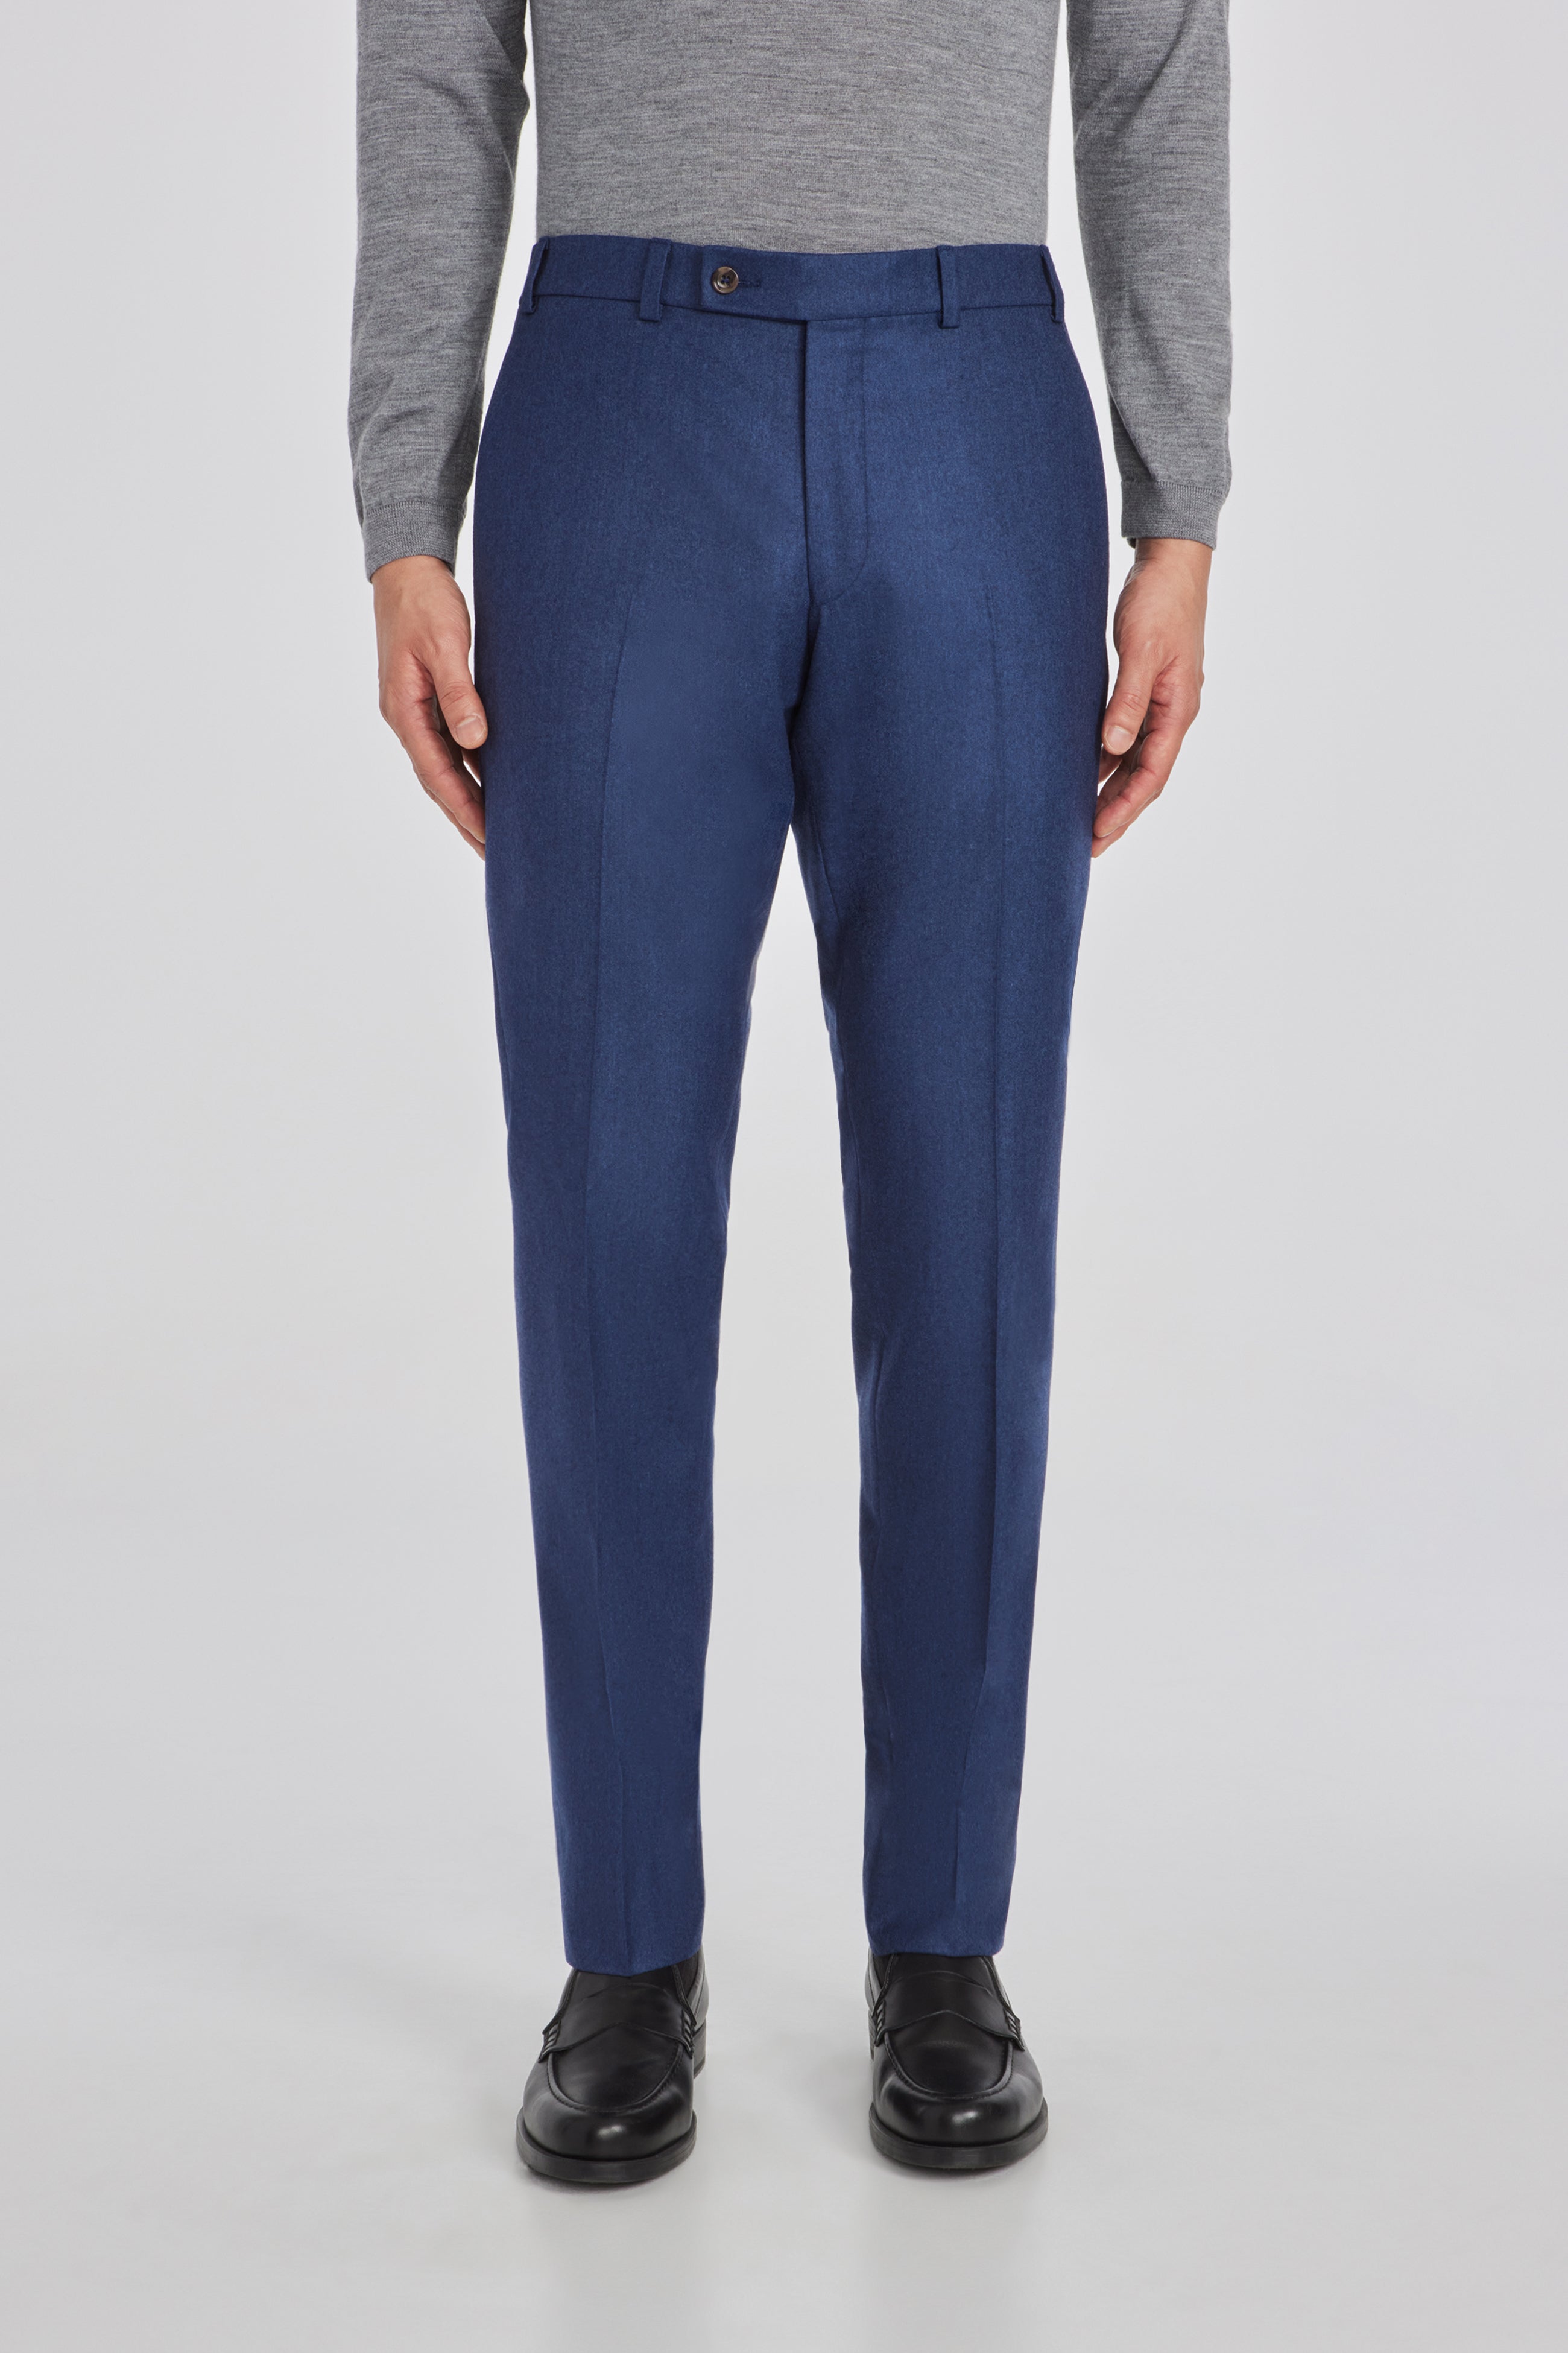 Pablo Royal Blue Wool and Cashmere Flannel Trouser